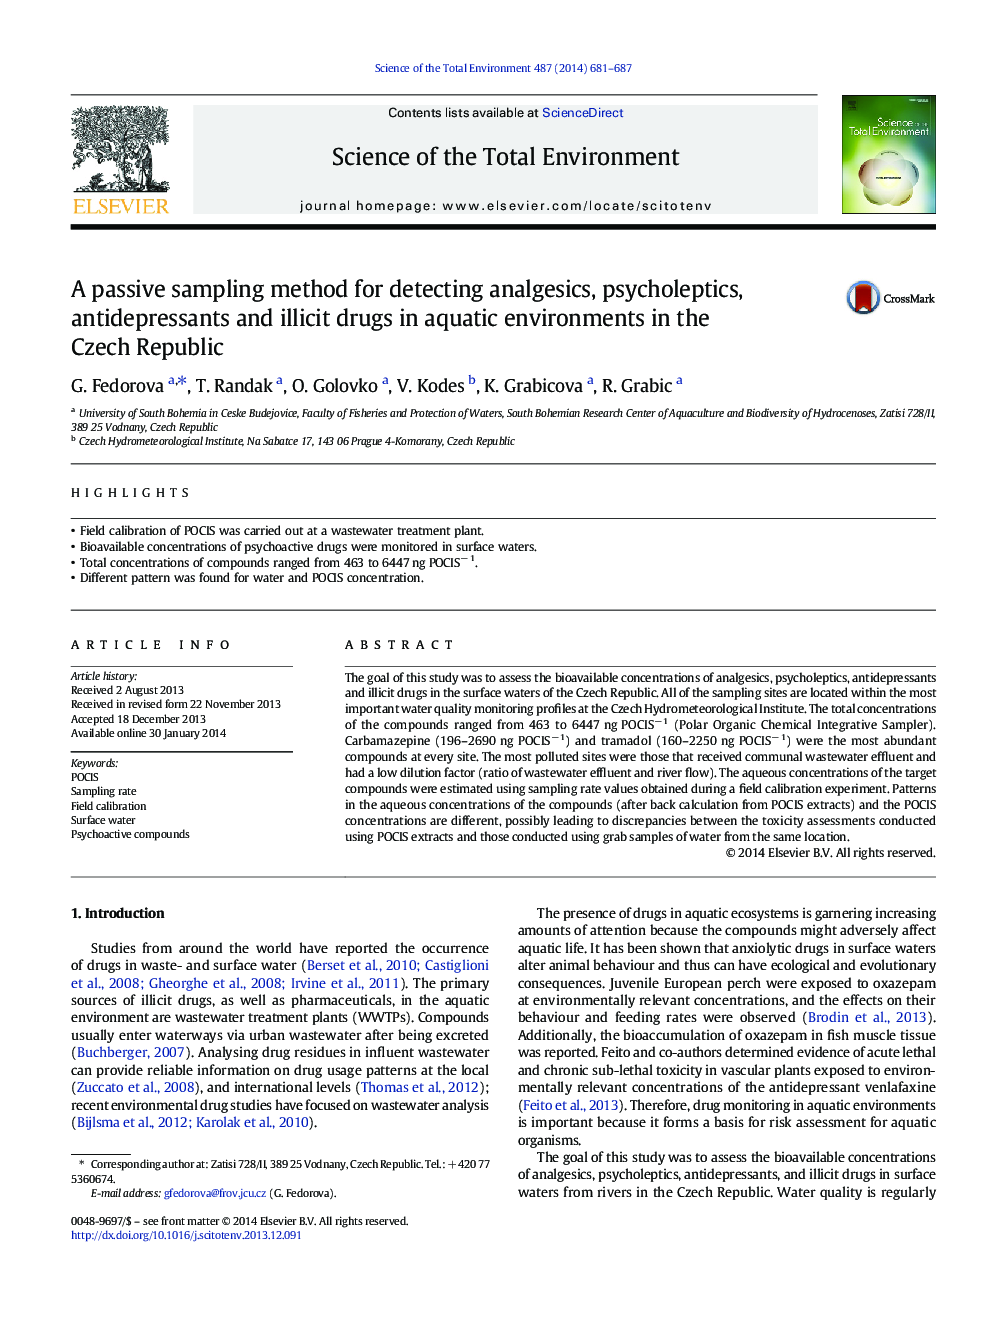 A passive sampling method for detecting analgesics, psycholeptics, antidepressants and illicit drugs in aquatic environments in the Czech Republic